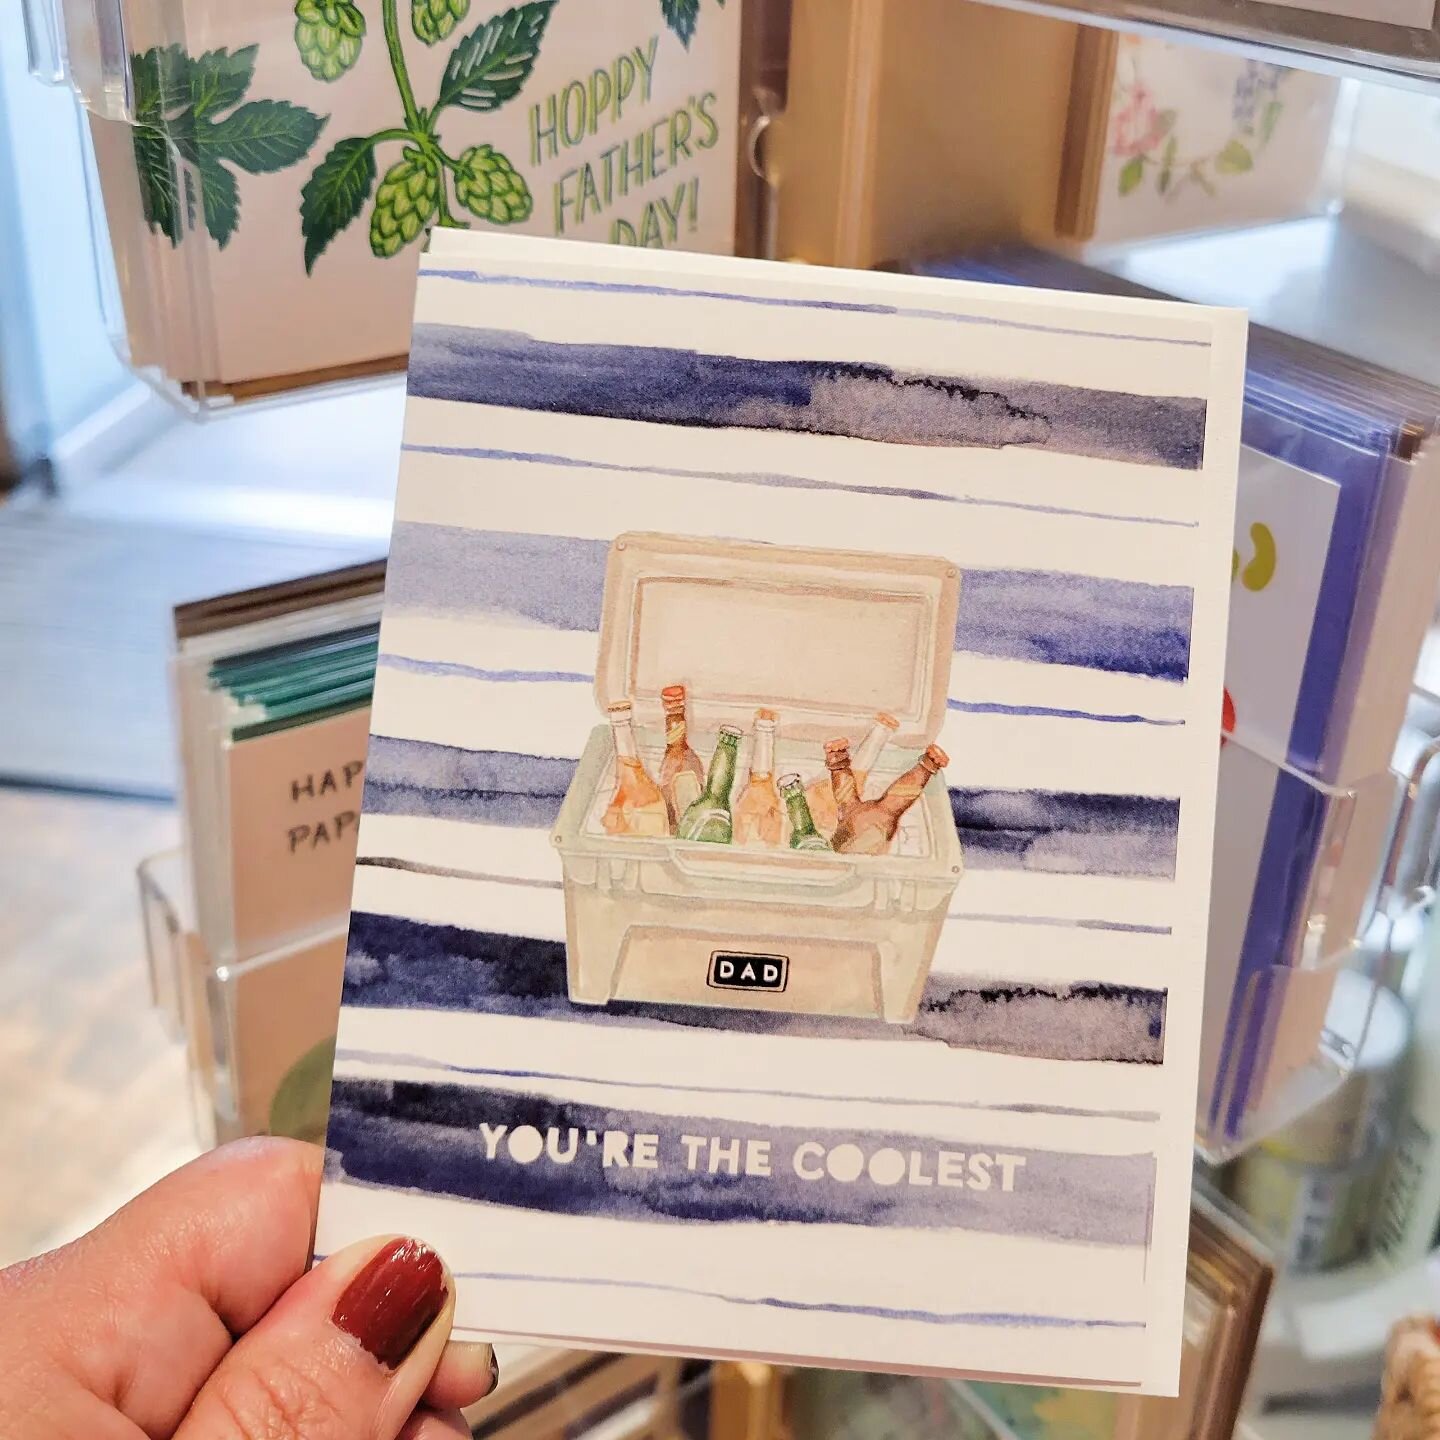 Get a great Father's Day card at I Heart Denver Store. We have locally designed greeting cards.

#iheartdenverstore #greetingcards #fathersday #downtowndenver #localstuff #shoplocalcolorado